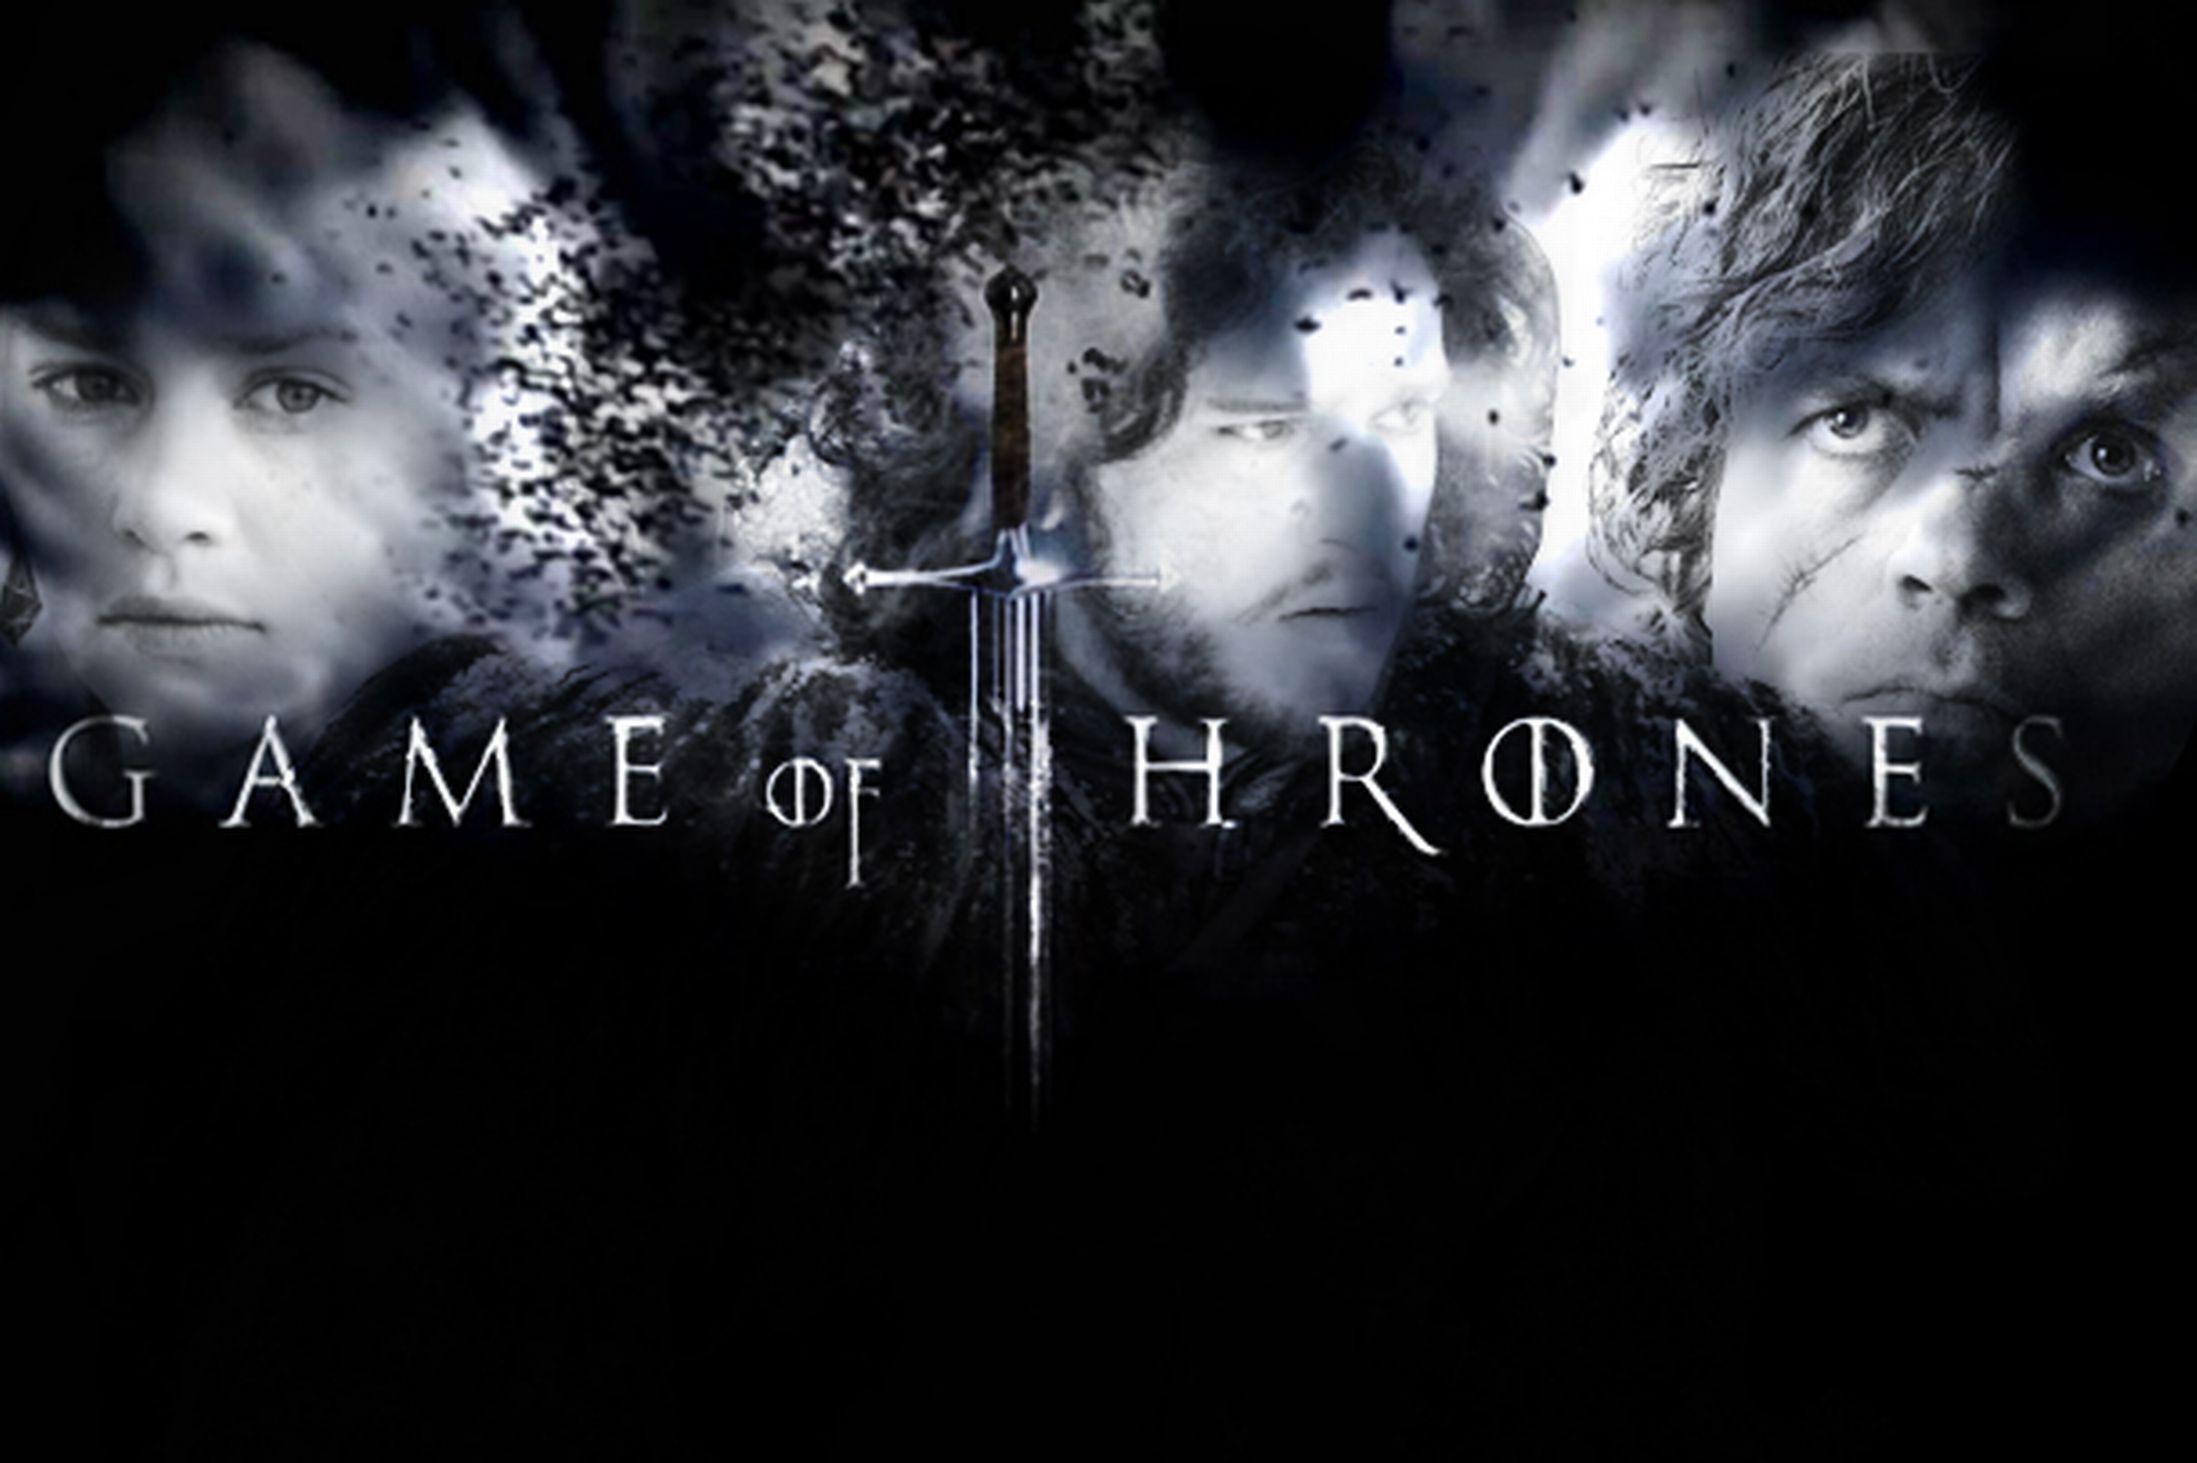 Game of Thrones Wallpaper High Resolution and Quality Download